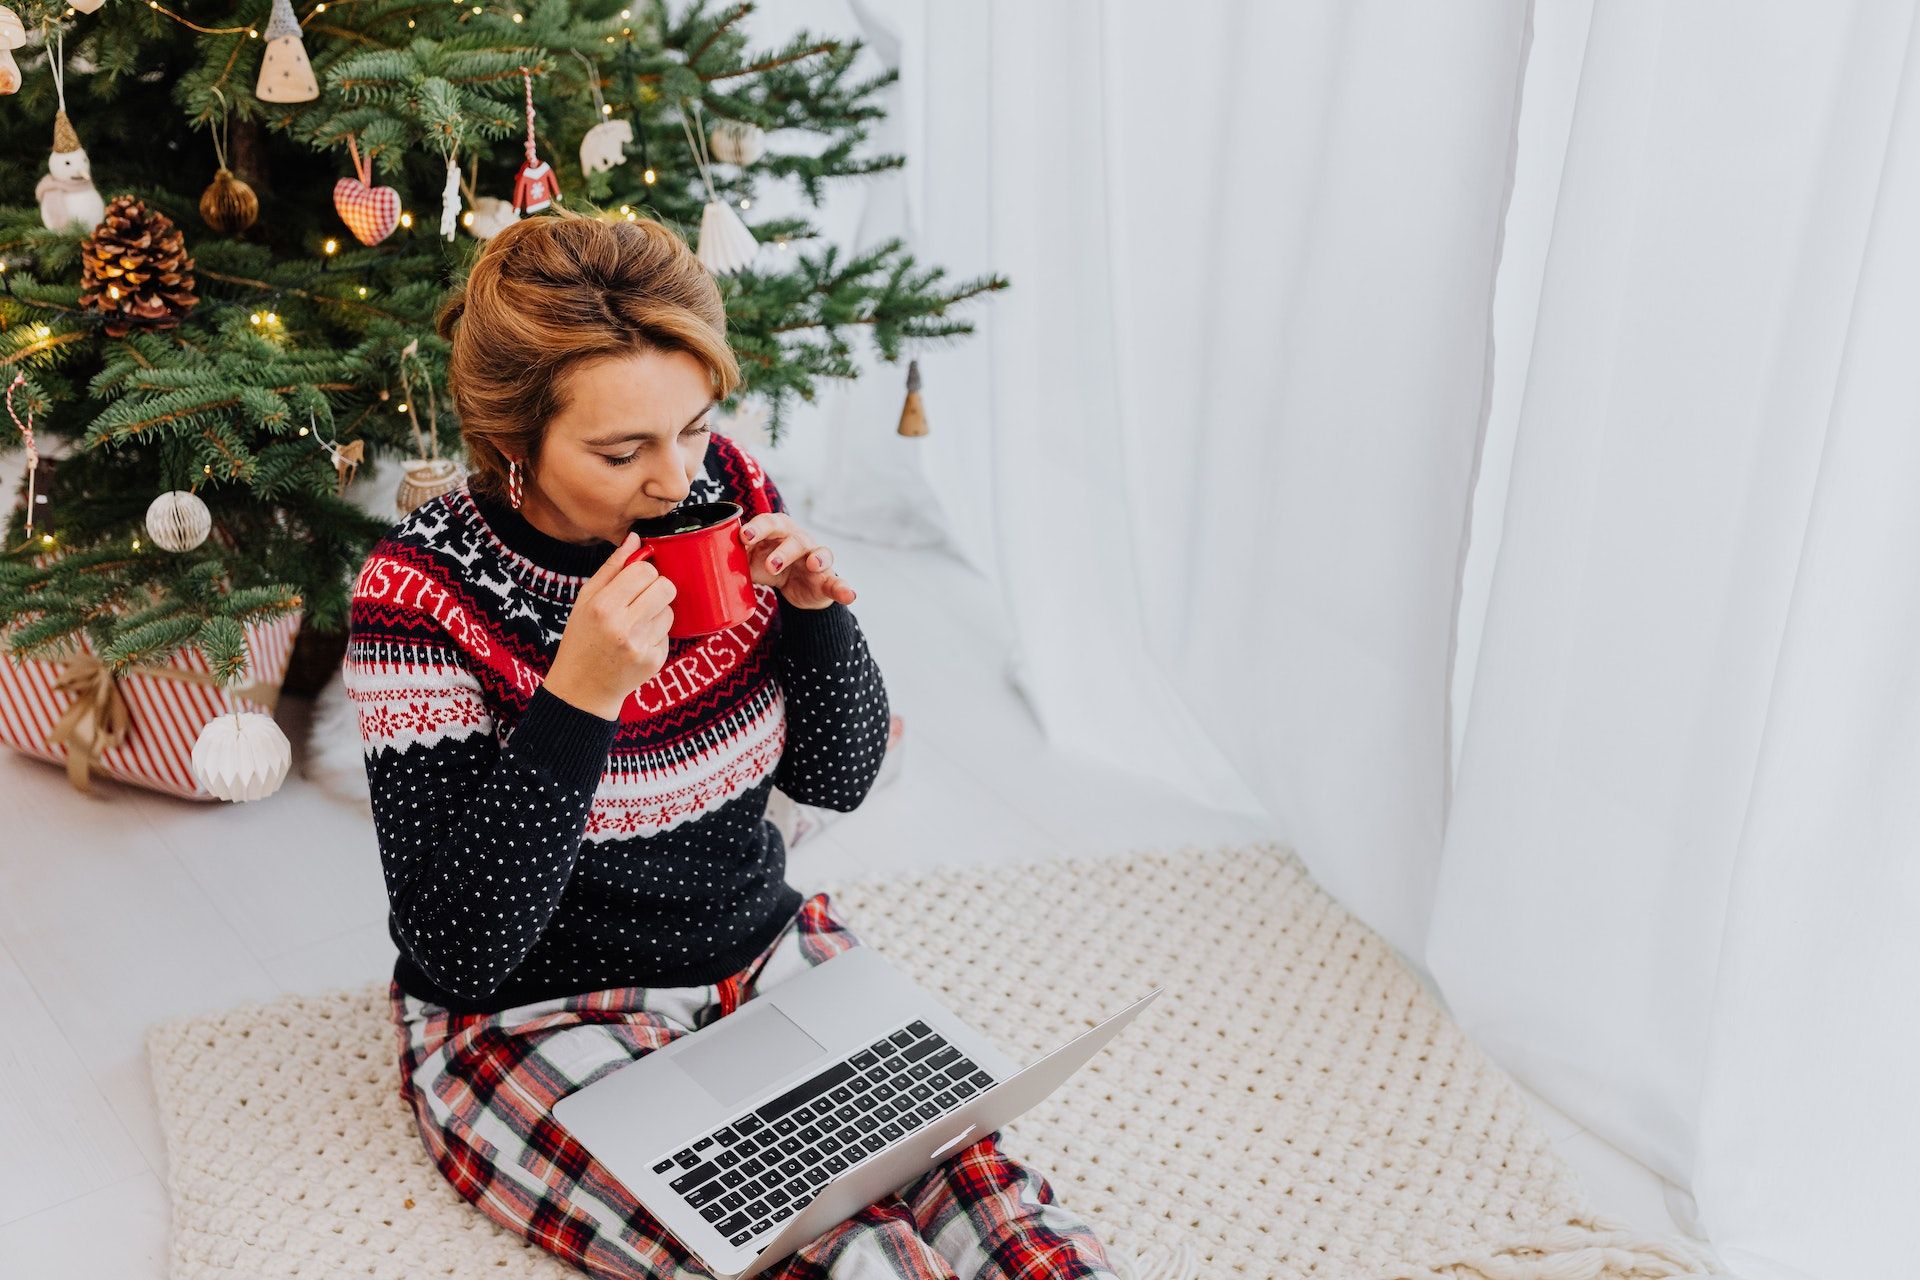 How to spot a holiday shopping scam: Fake deals, trick surveys & bogus gift  cards - F-Secure Blog